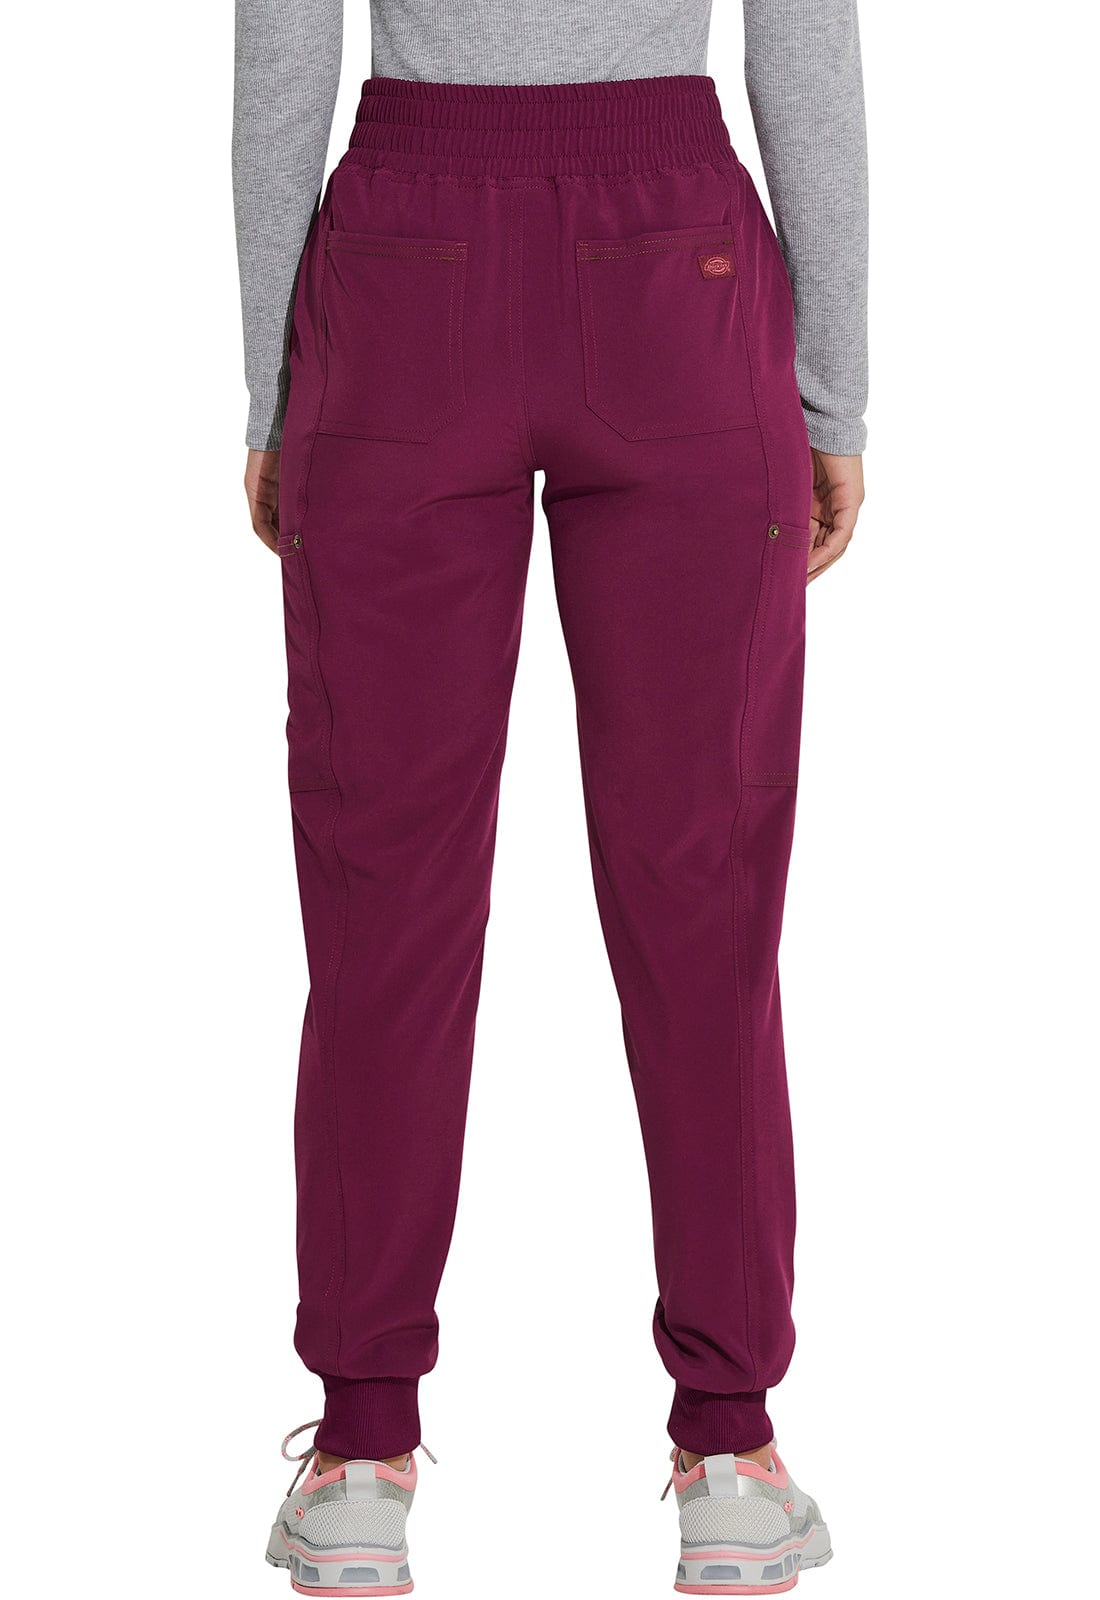 Essentials Womens Maroon Joggers Size XS - beyond exchange